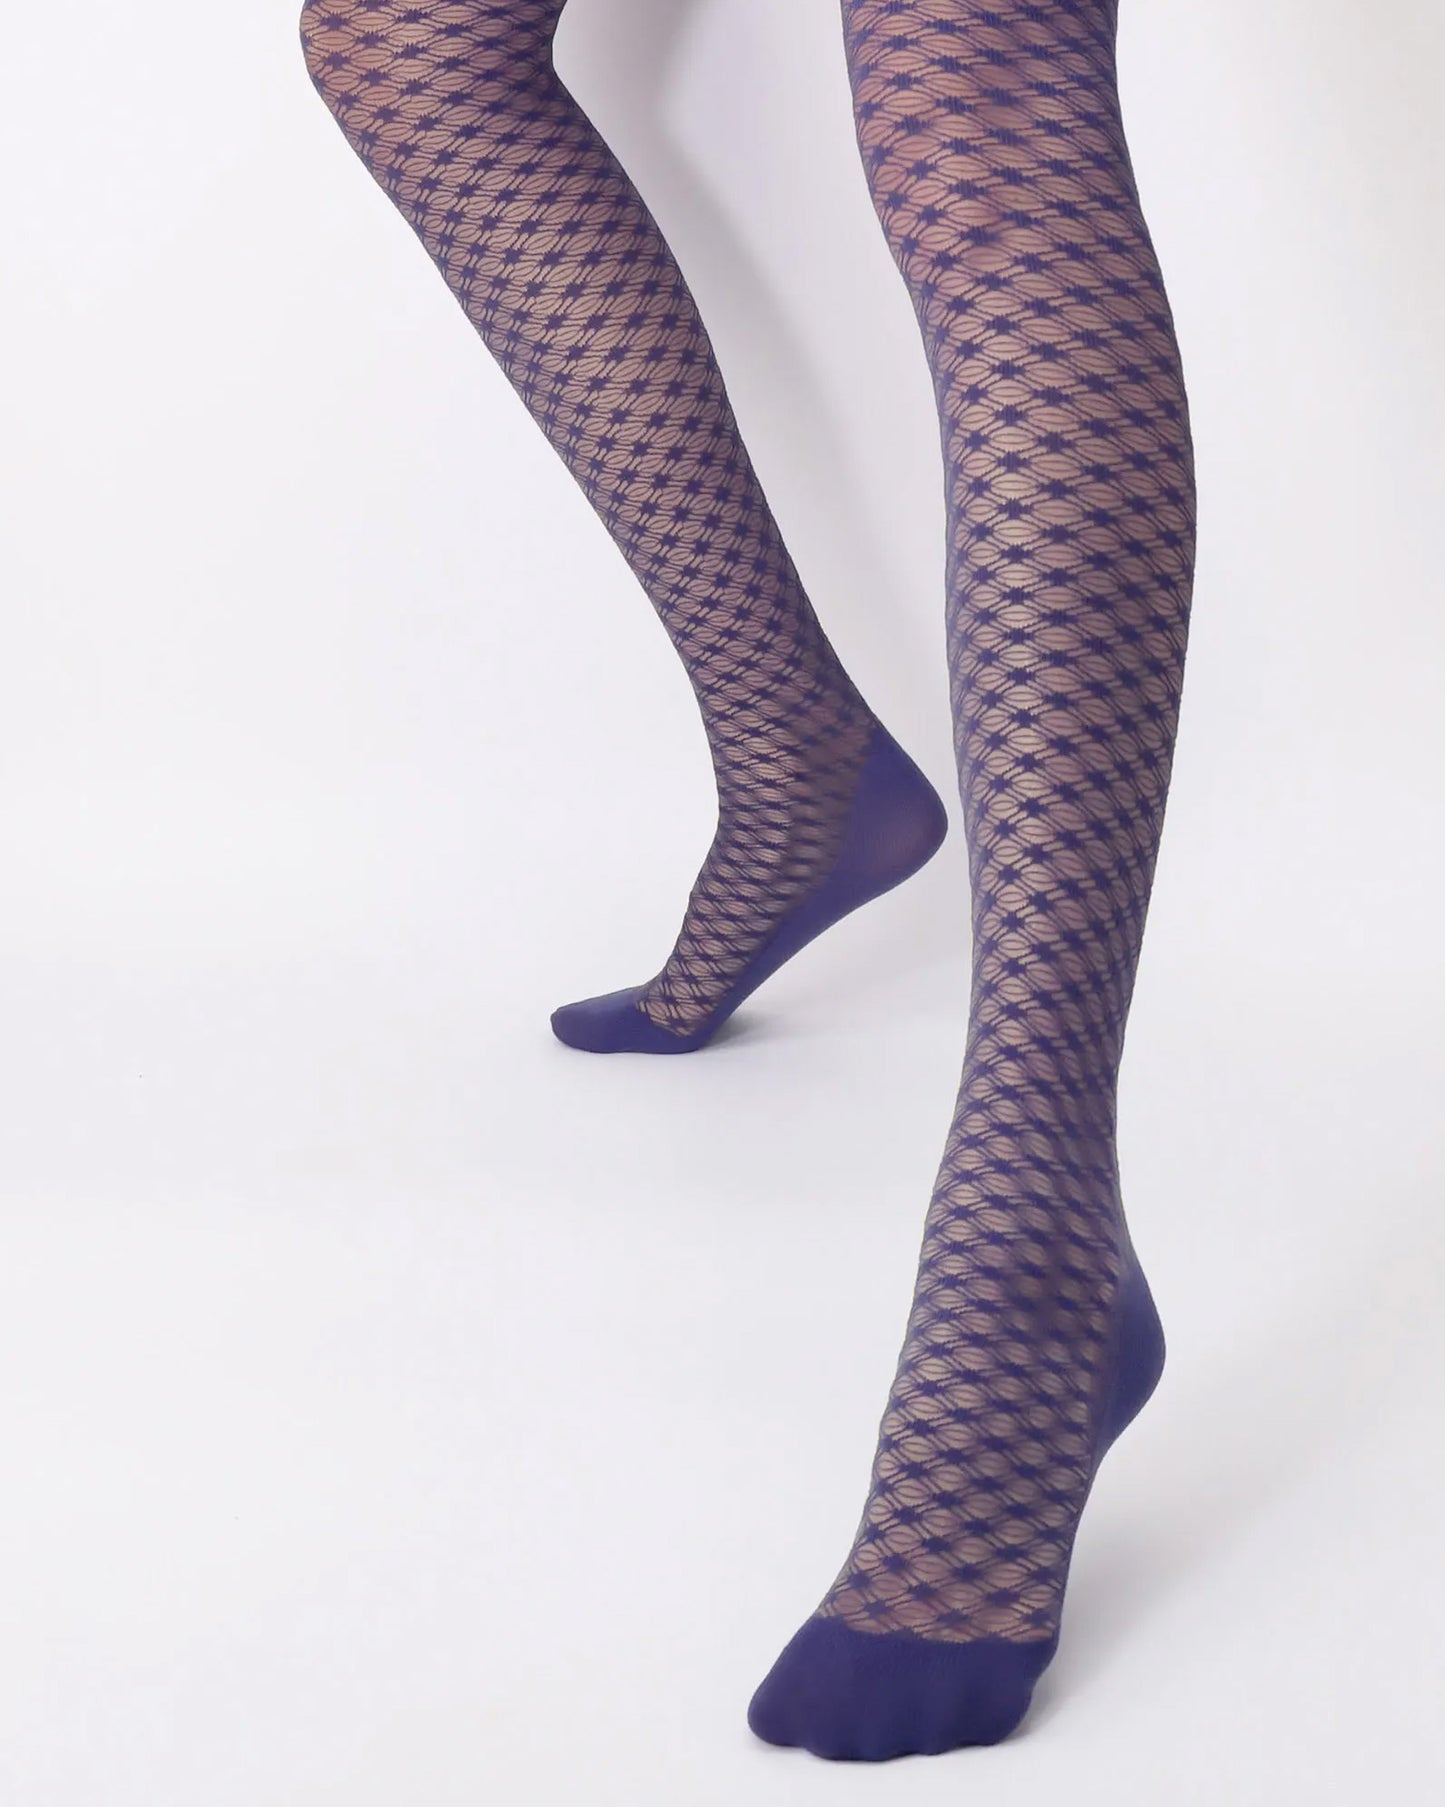 Oroblù Eco Craft Sneaker Tights - Indigo blue semi sheer fashion tights made of eco friendly recycled polyamide with a woven enclosed crochet style diamond net pattern, built in shoe liner sock